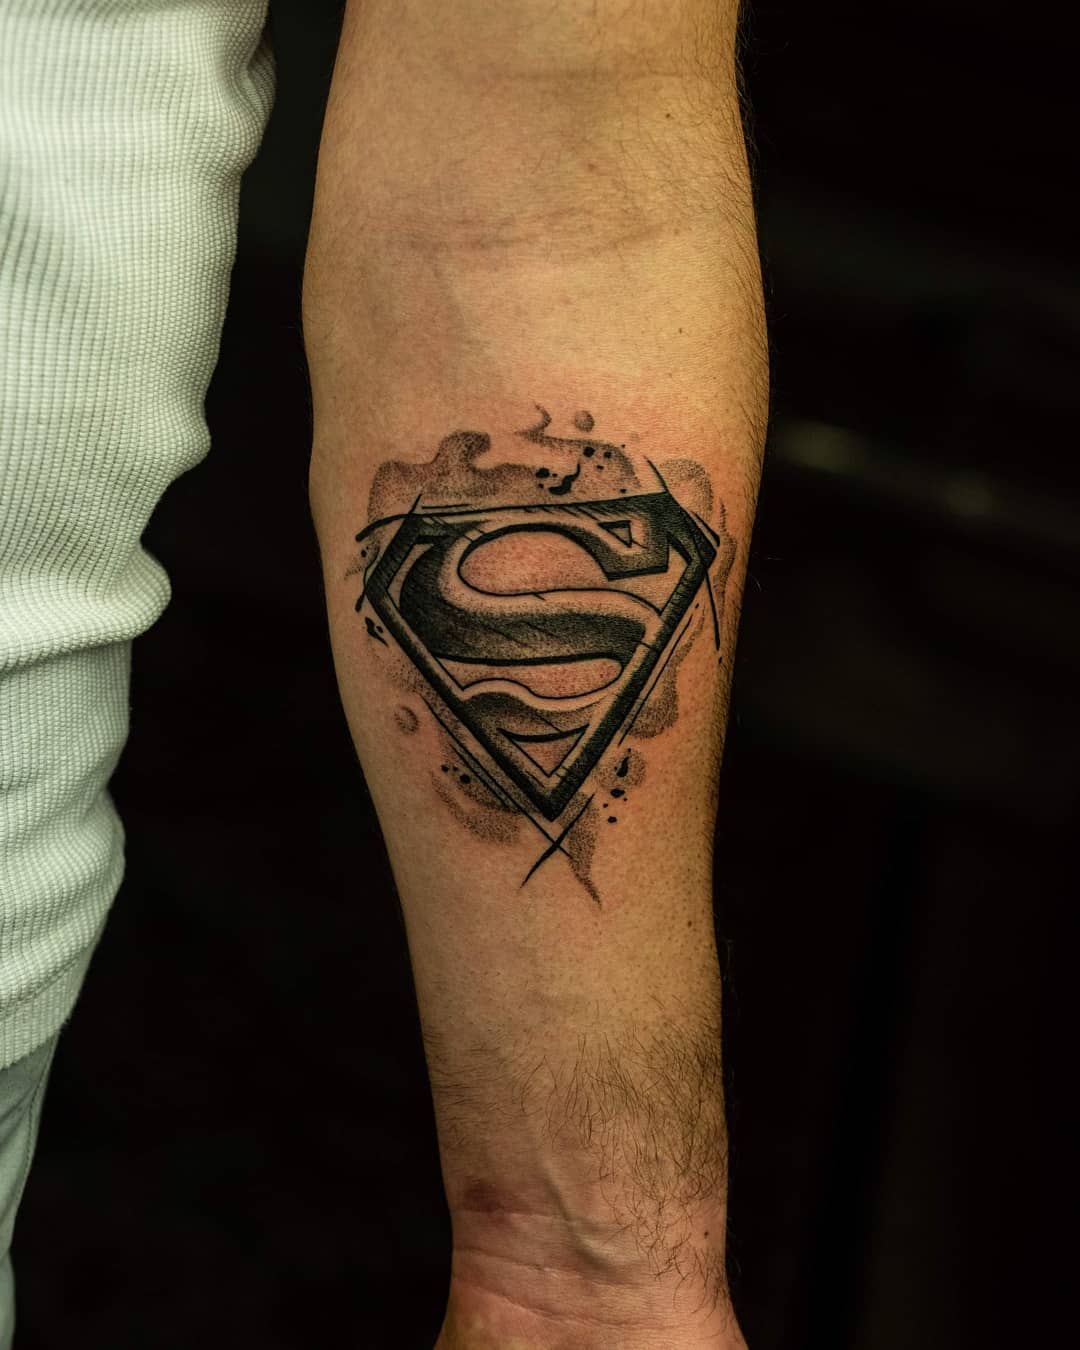 100 Compelling Superman Tattoo Designs with Meanings and Ideas - Body Art  Guru